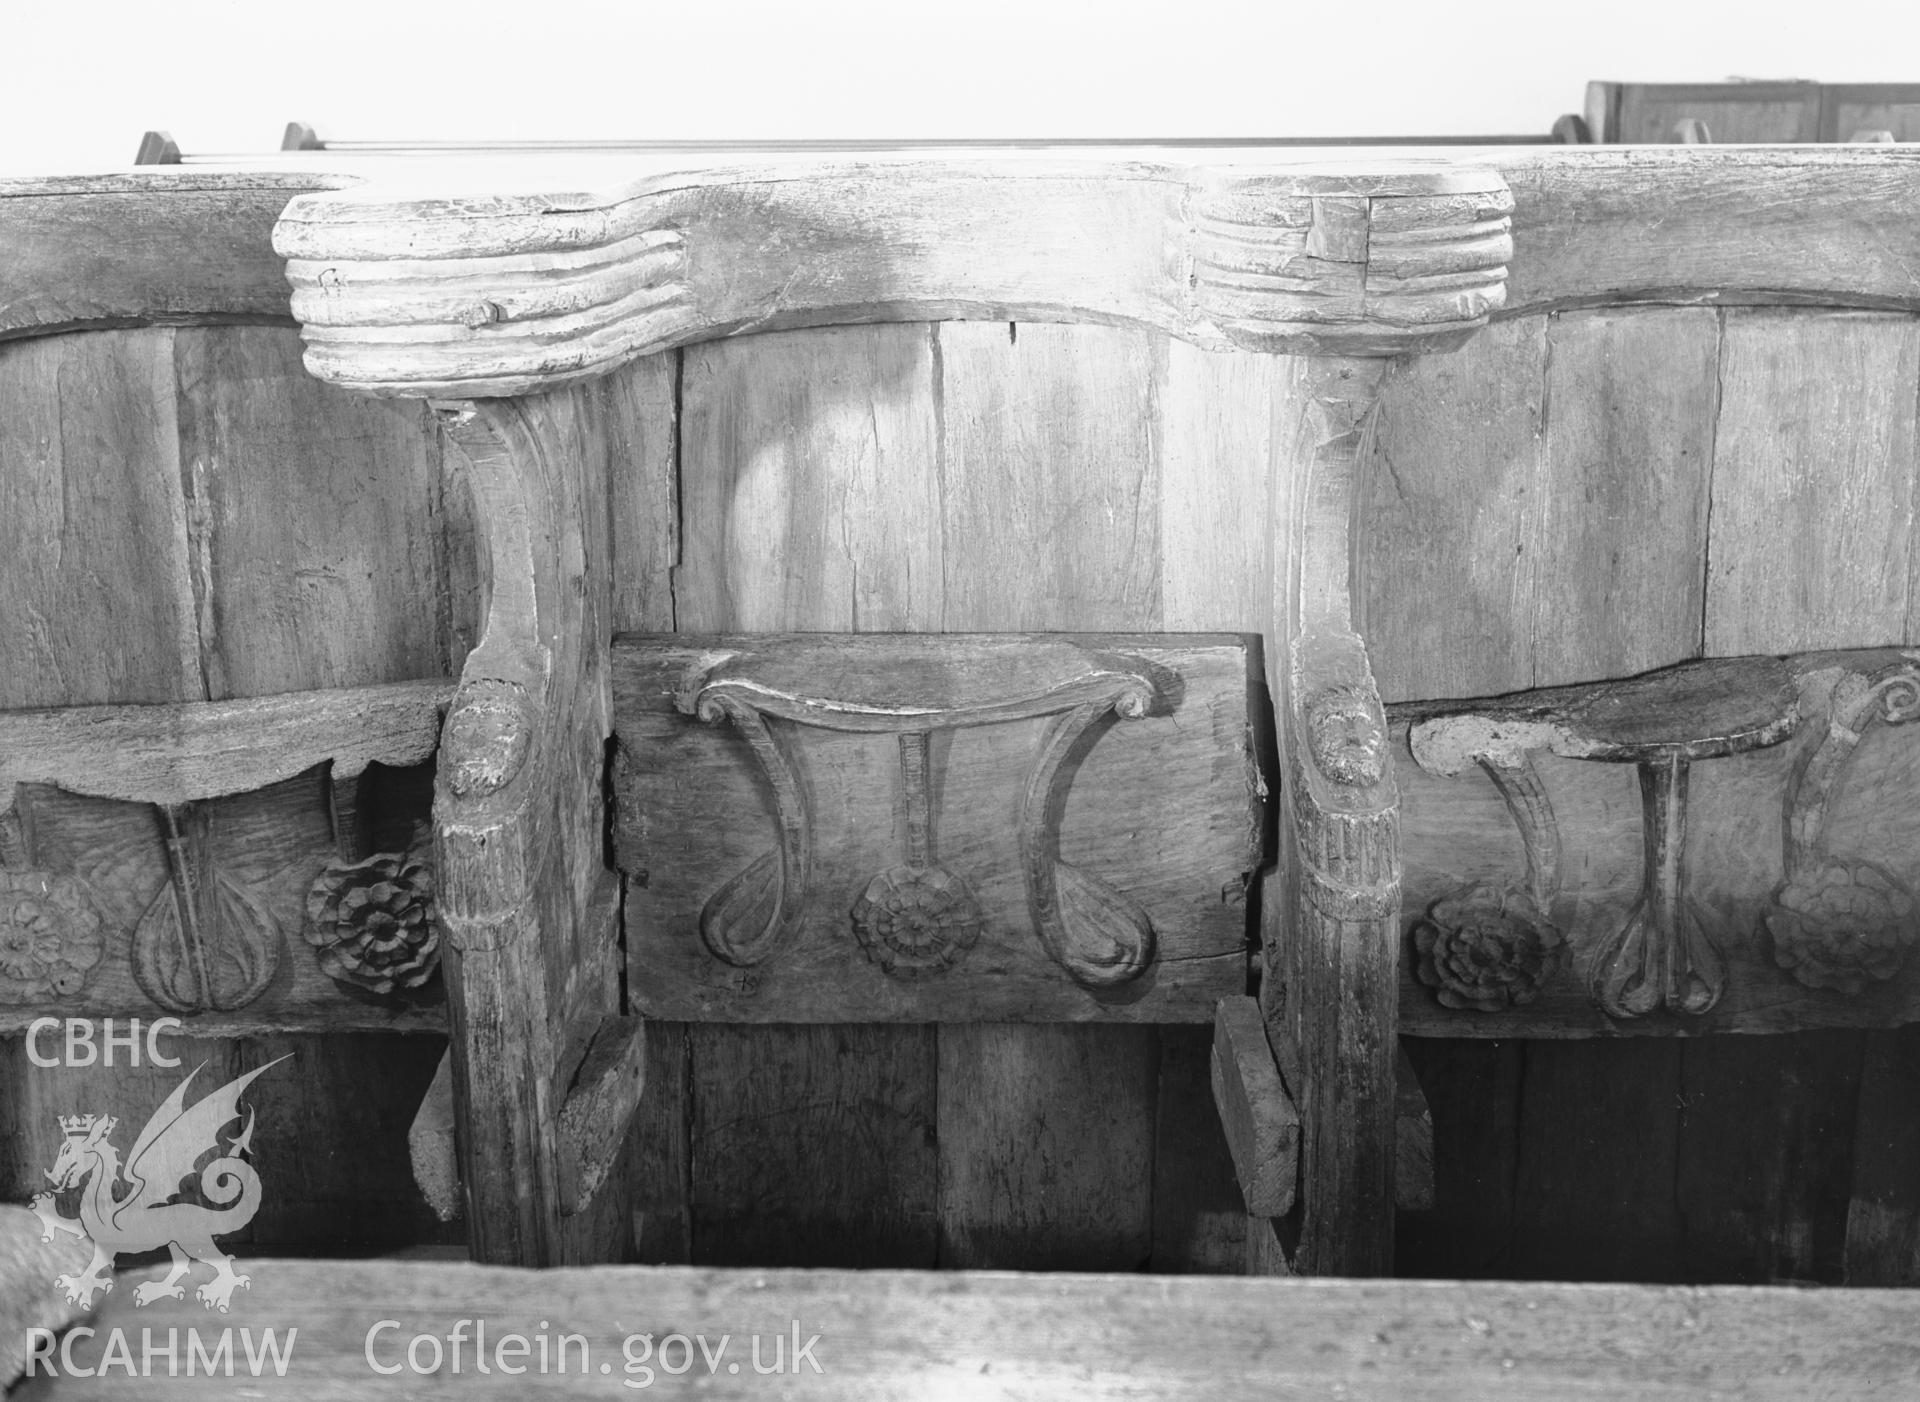 Interior view of the stalls showing misericords.